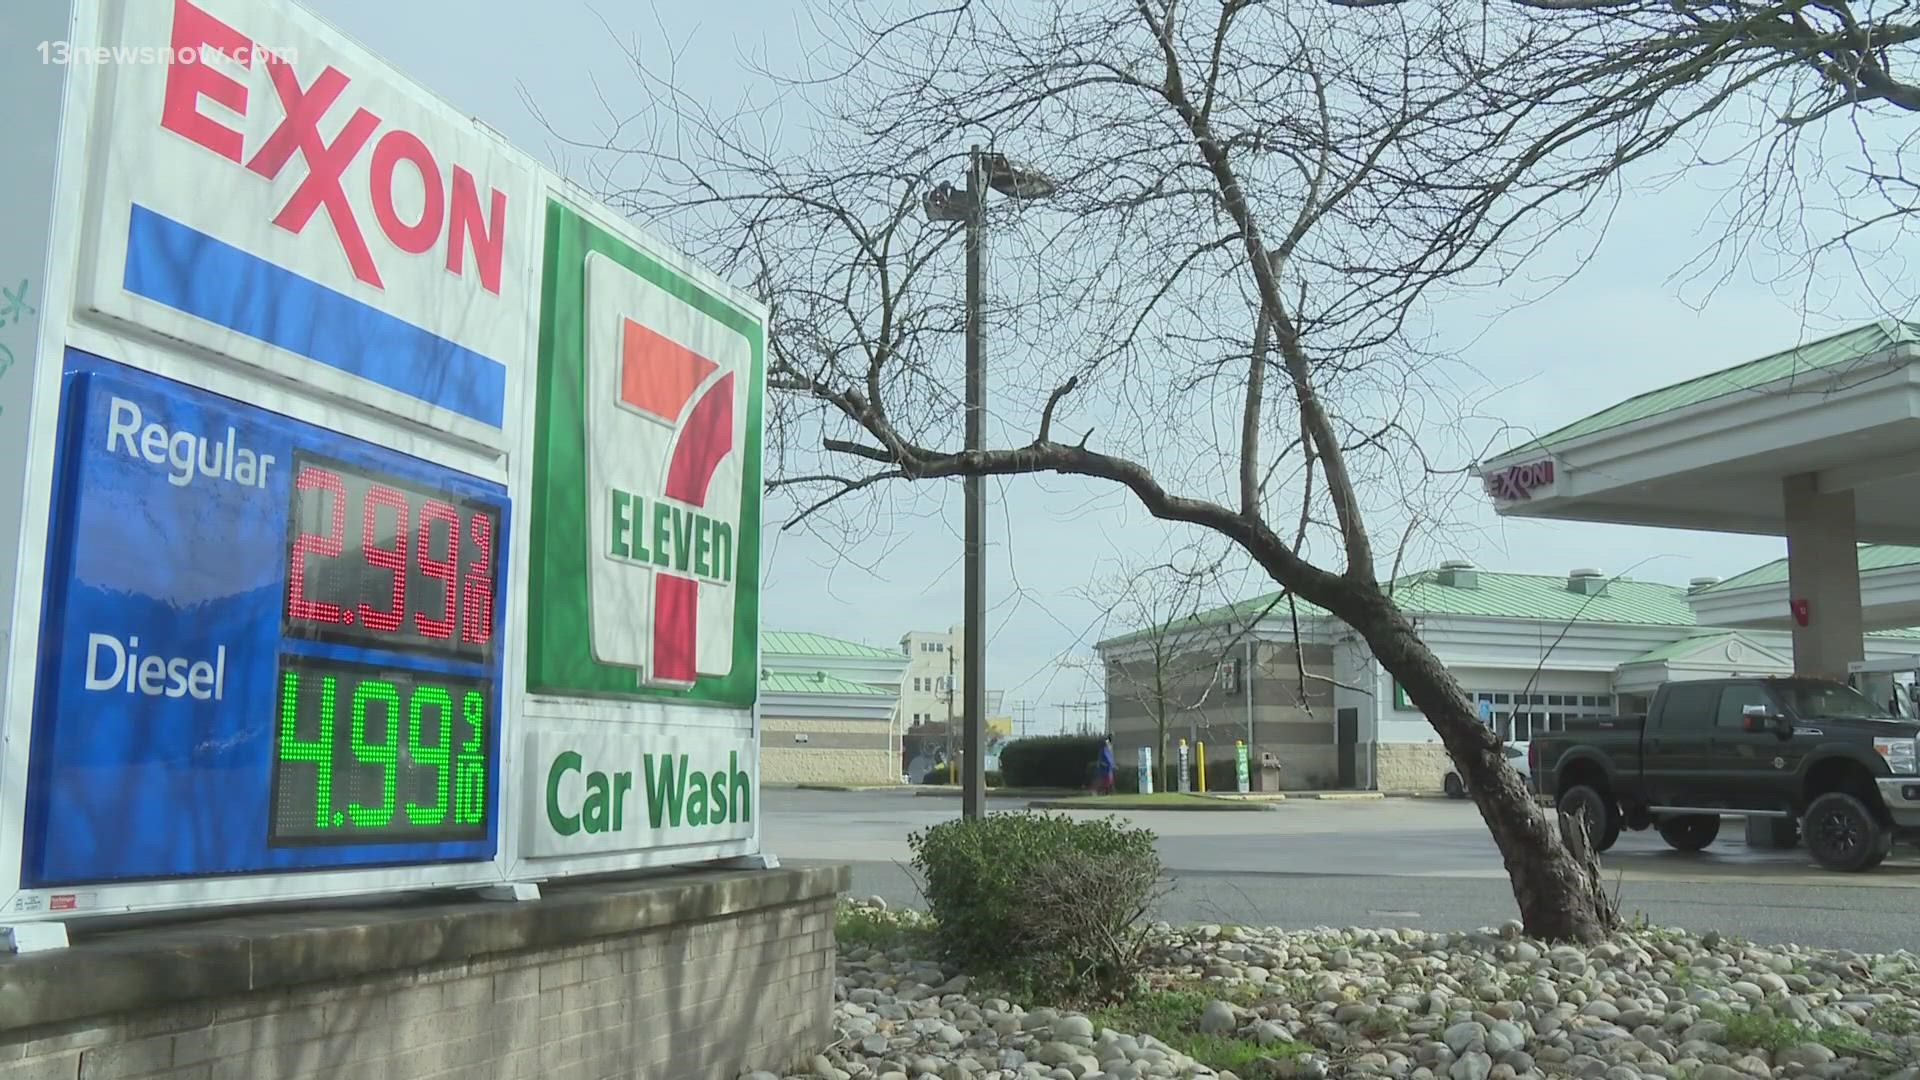 Virginia is averaging roughly $3.42 a gallon, according to AAA.